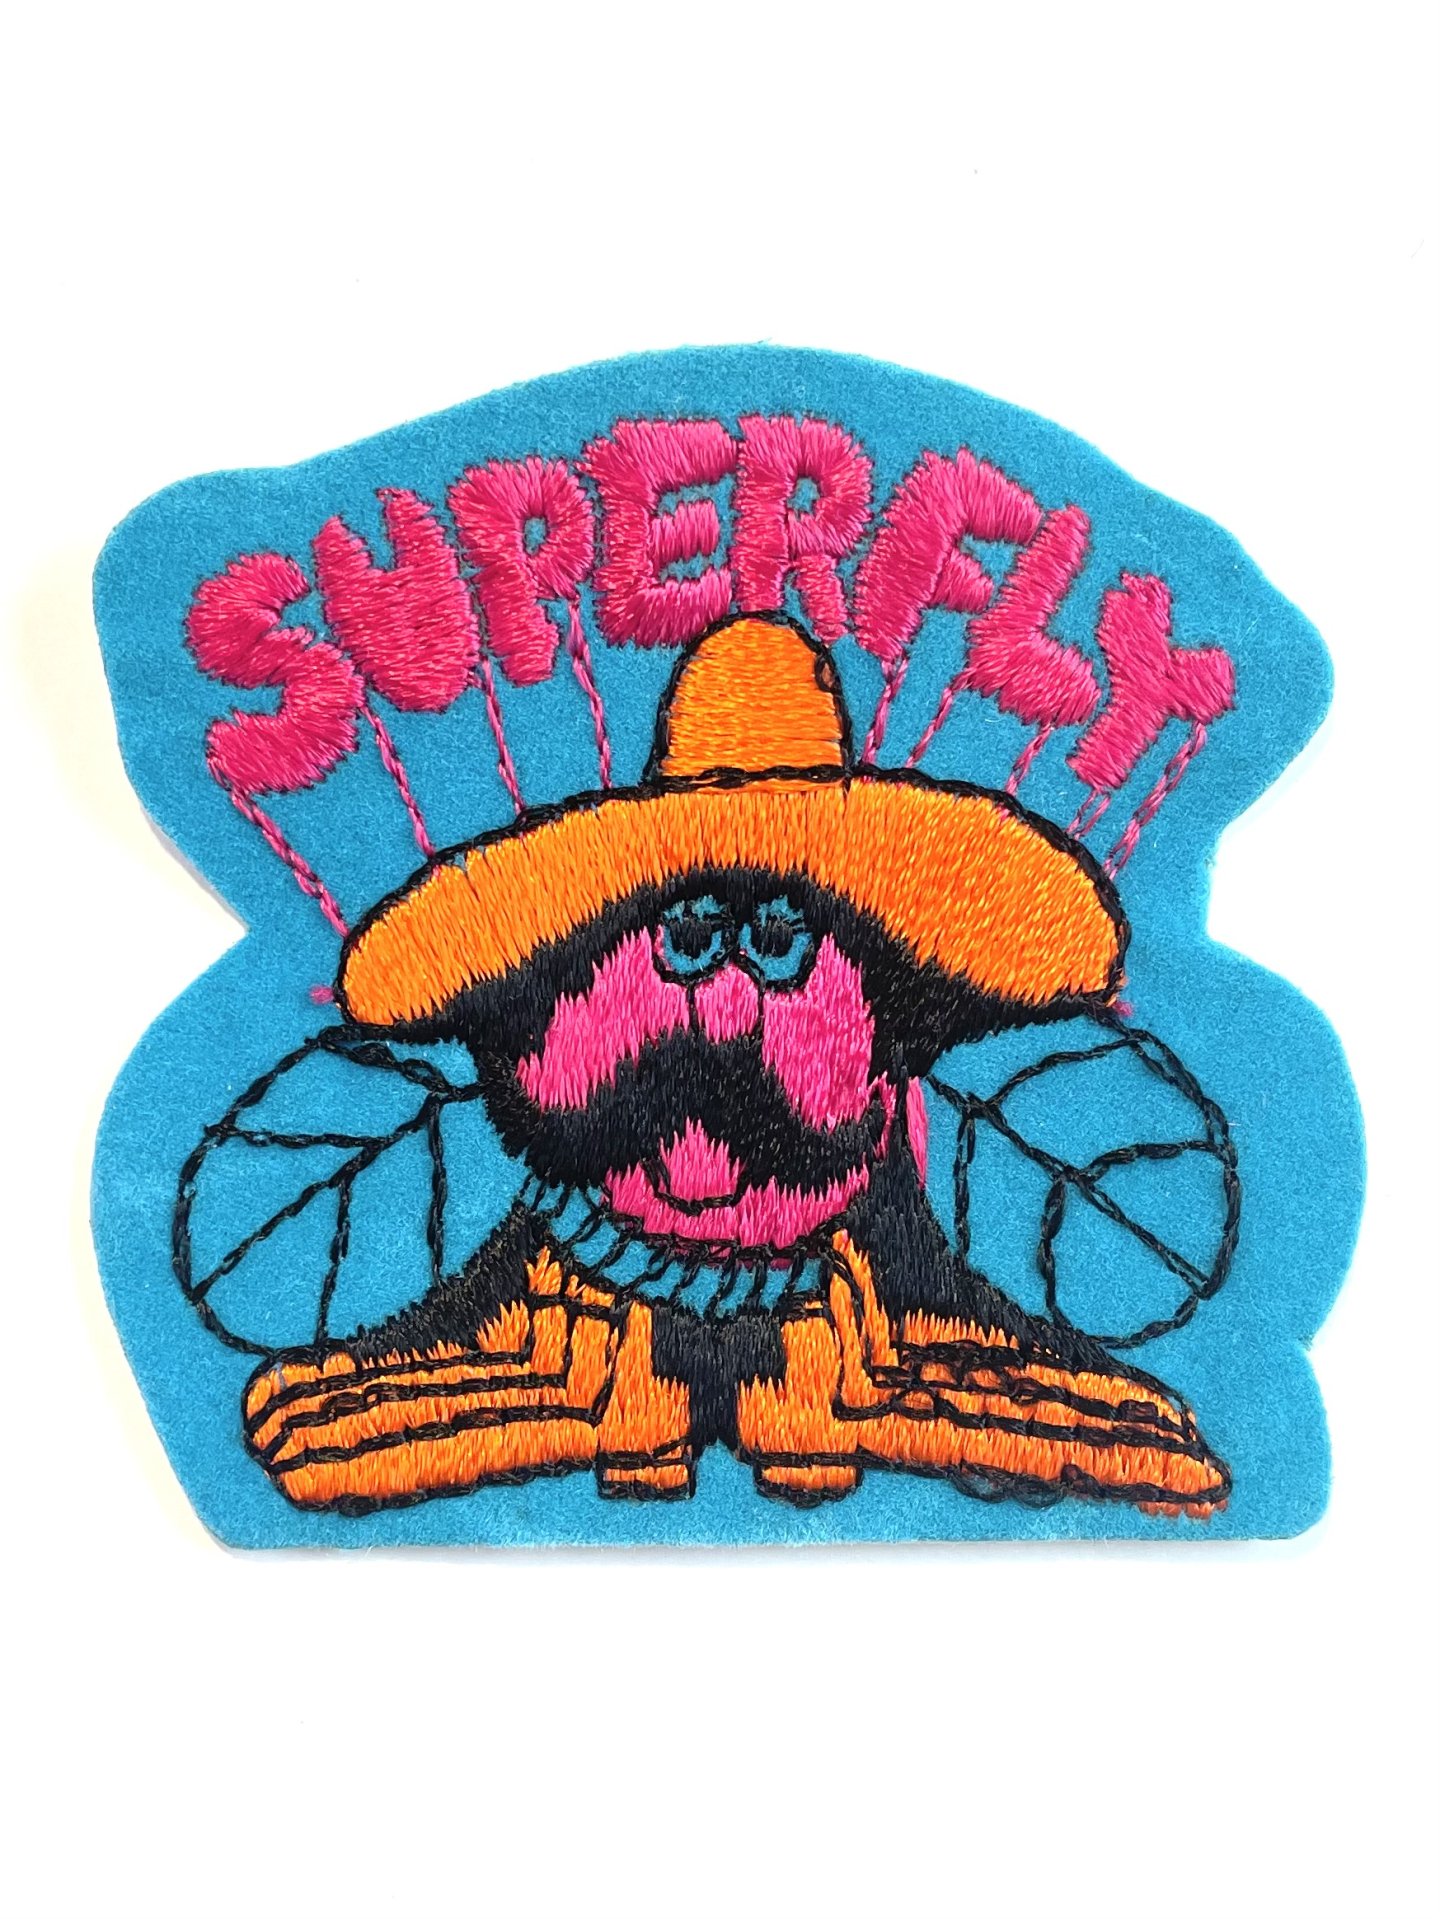 1970's SUPERFLY